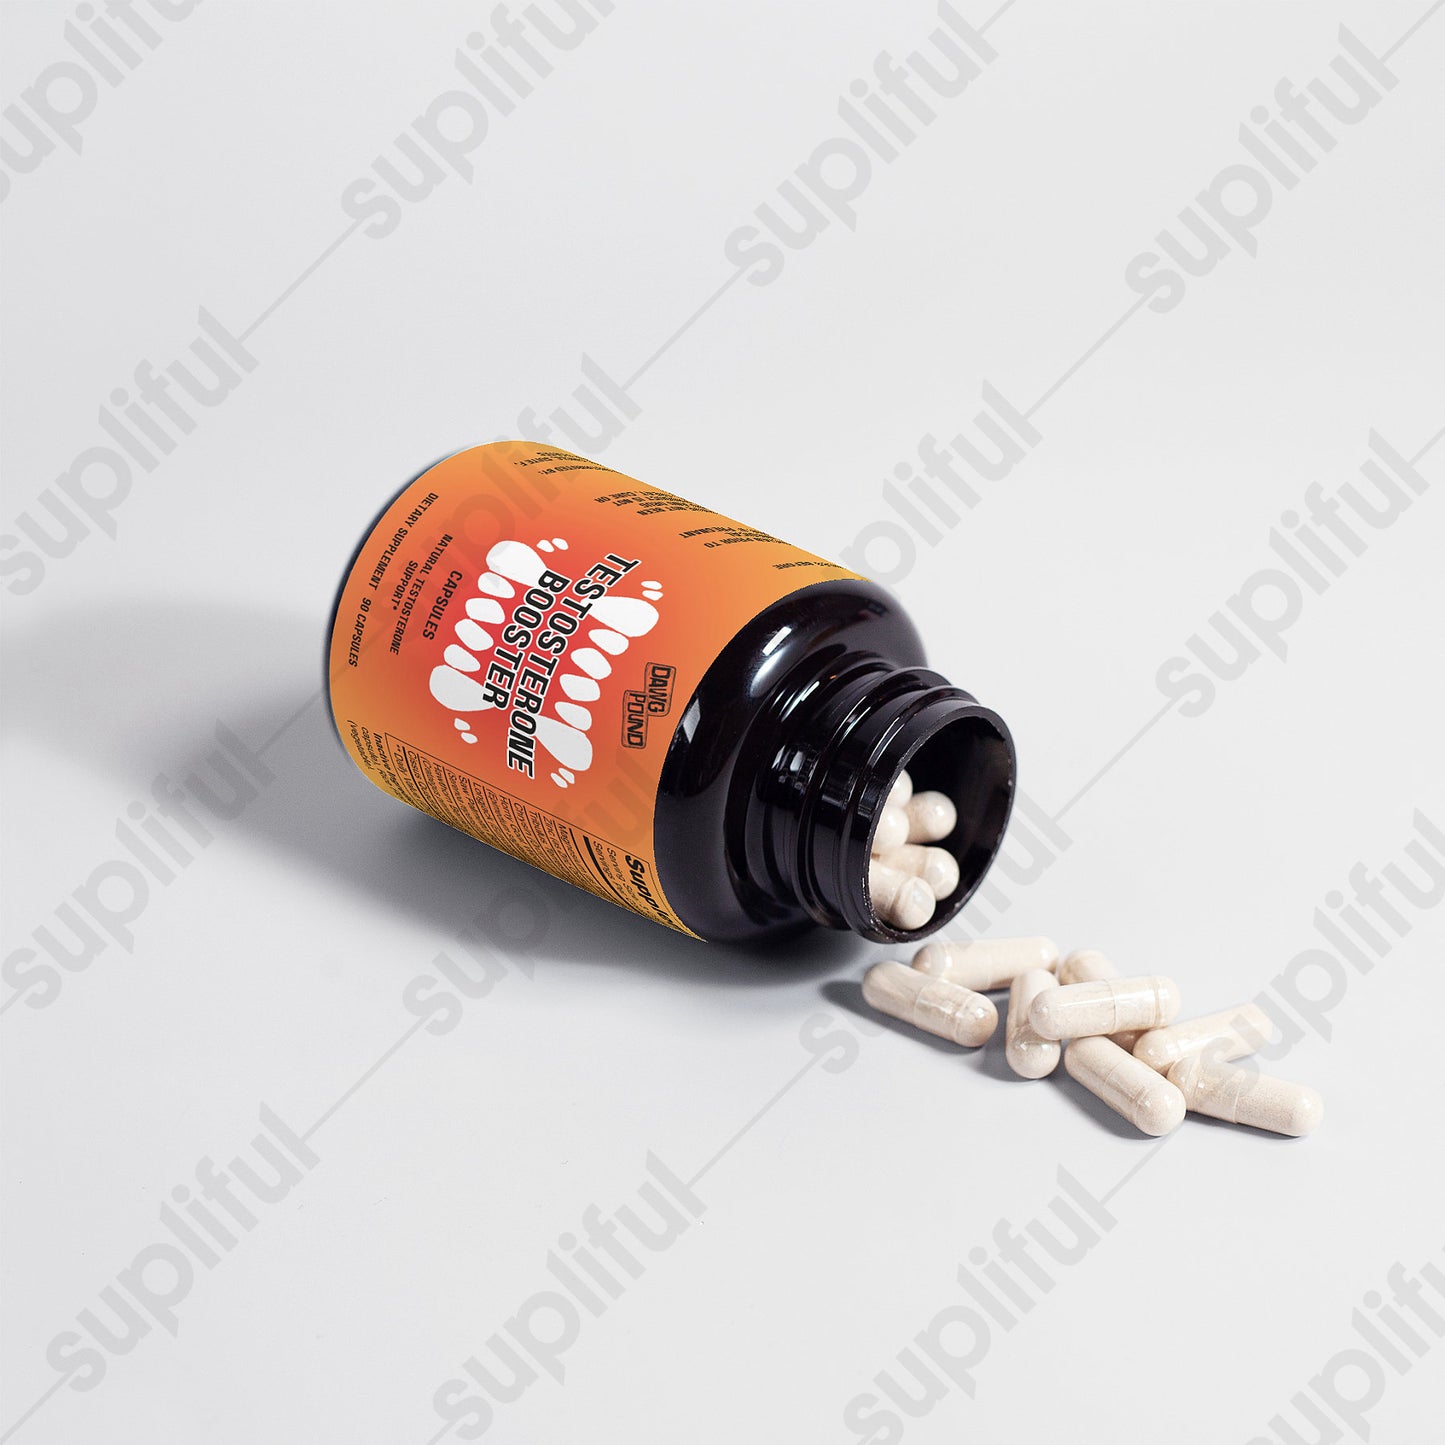 Dawg Pound Testosterone Booster Capsules - Titled Opened Bottle with Capsules Pouring Out